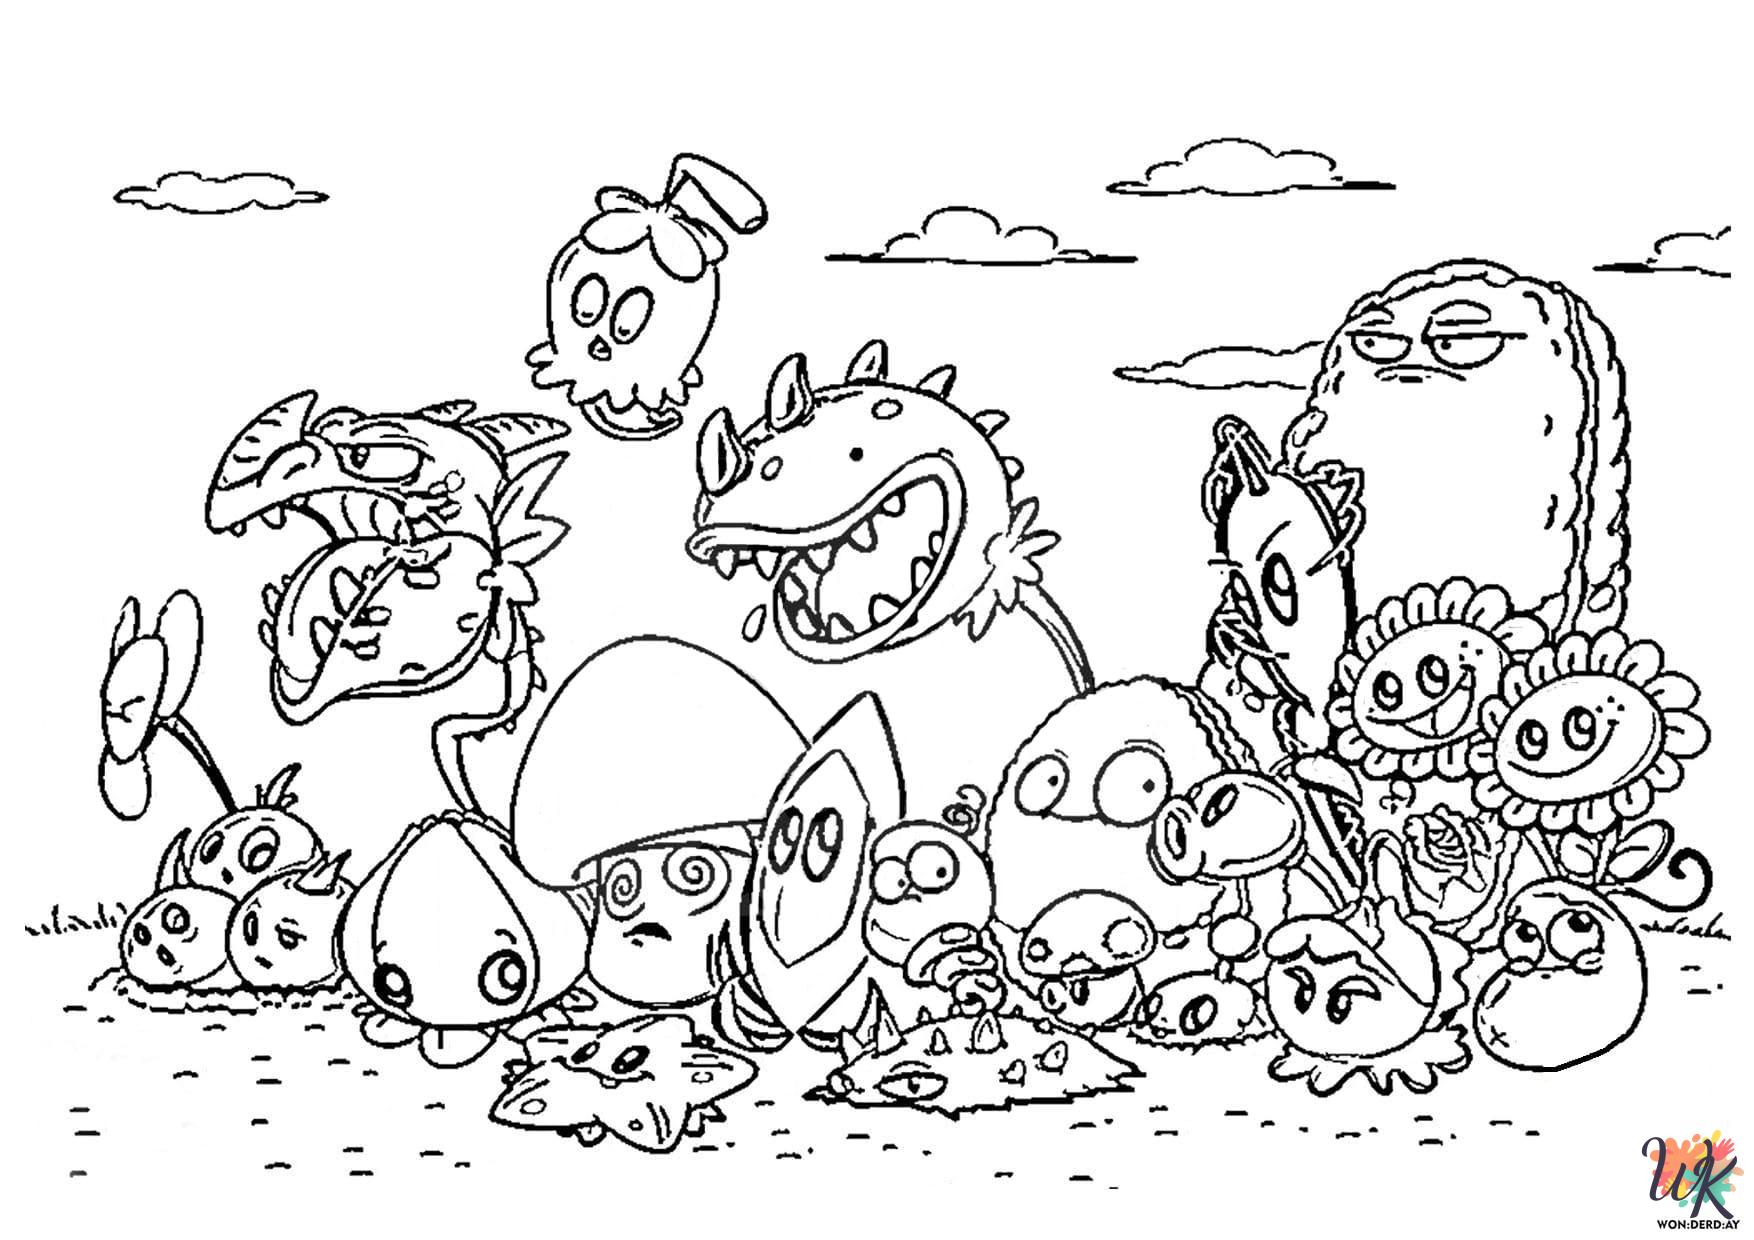 Plants vs. Zombies coloring book pages